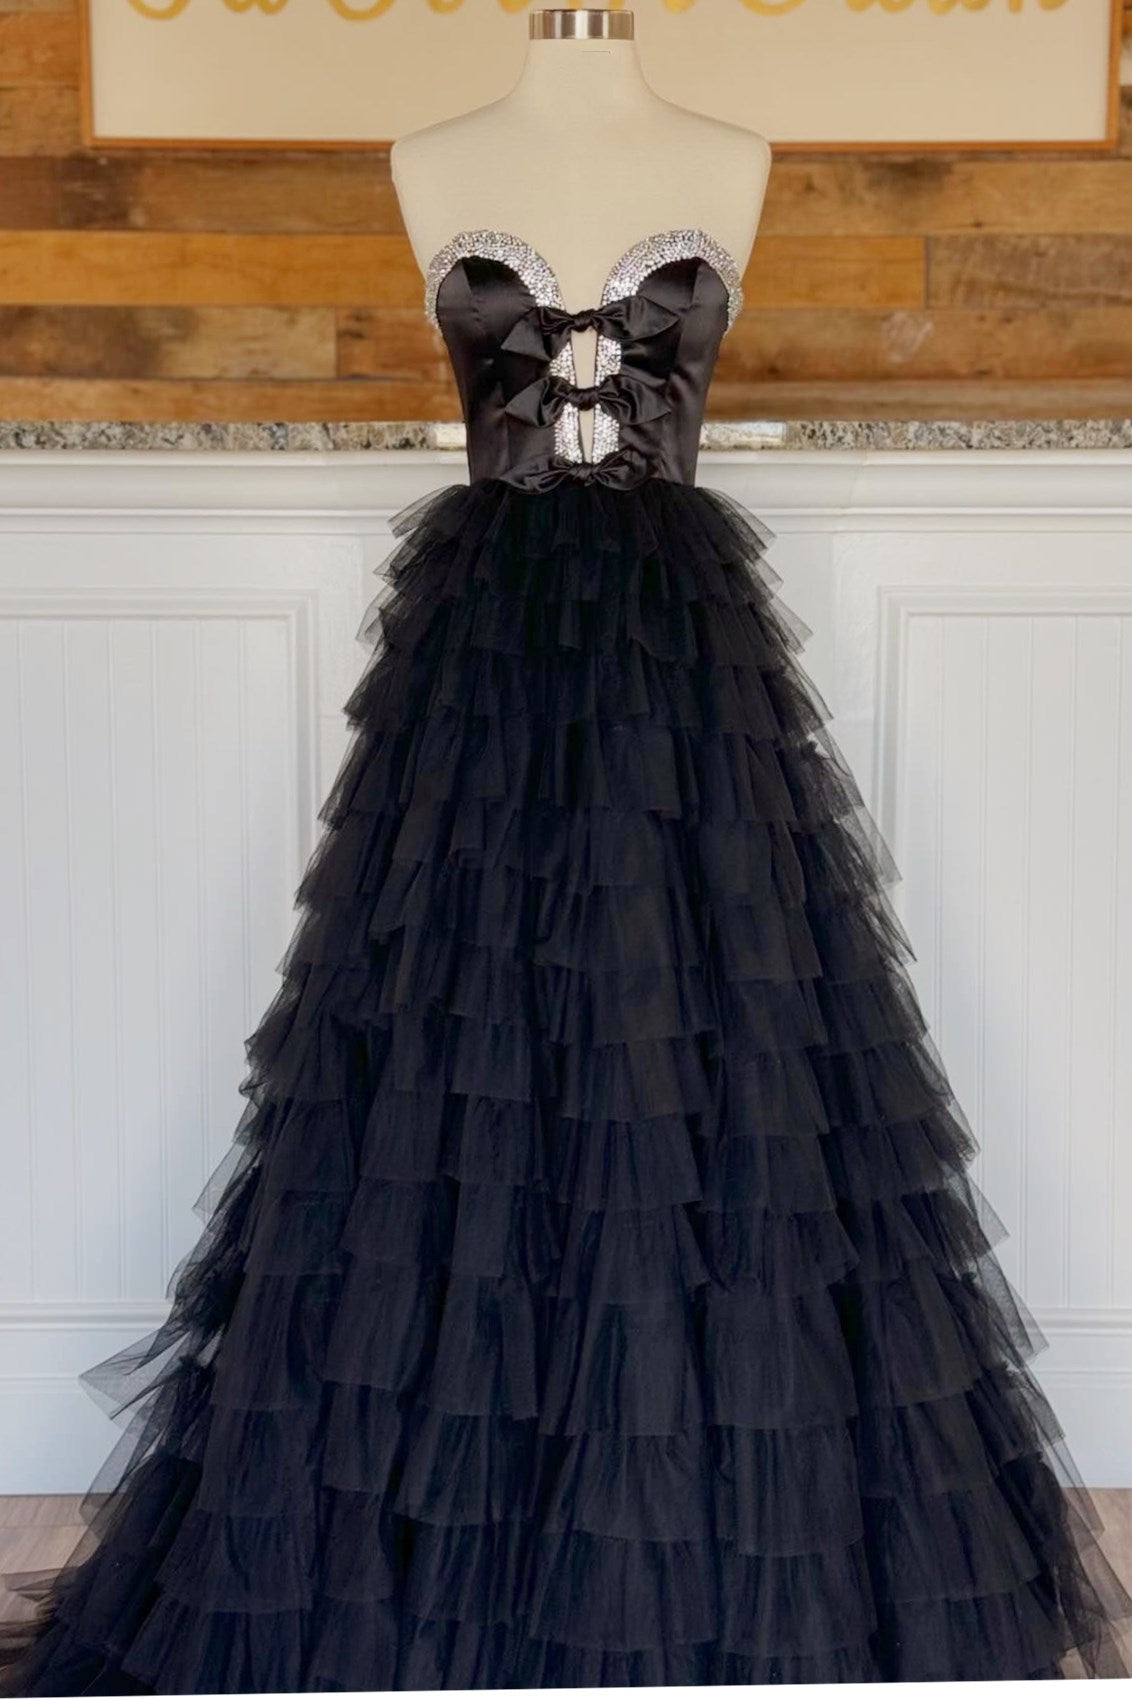 Peggy | Black Strapless Bow Ruffle Long Prom Dress with Slit